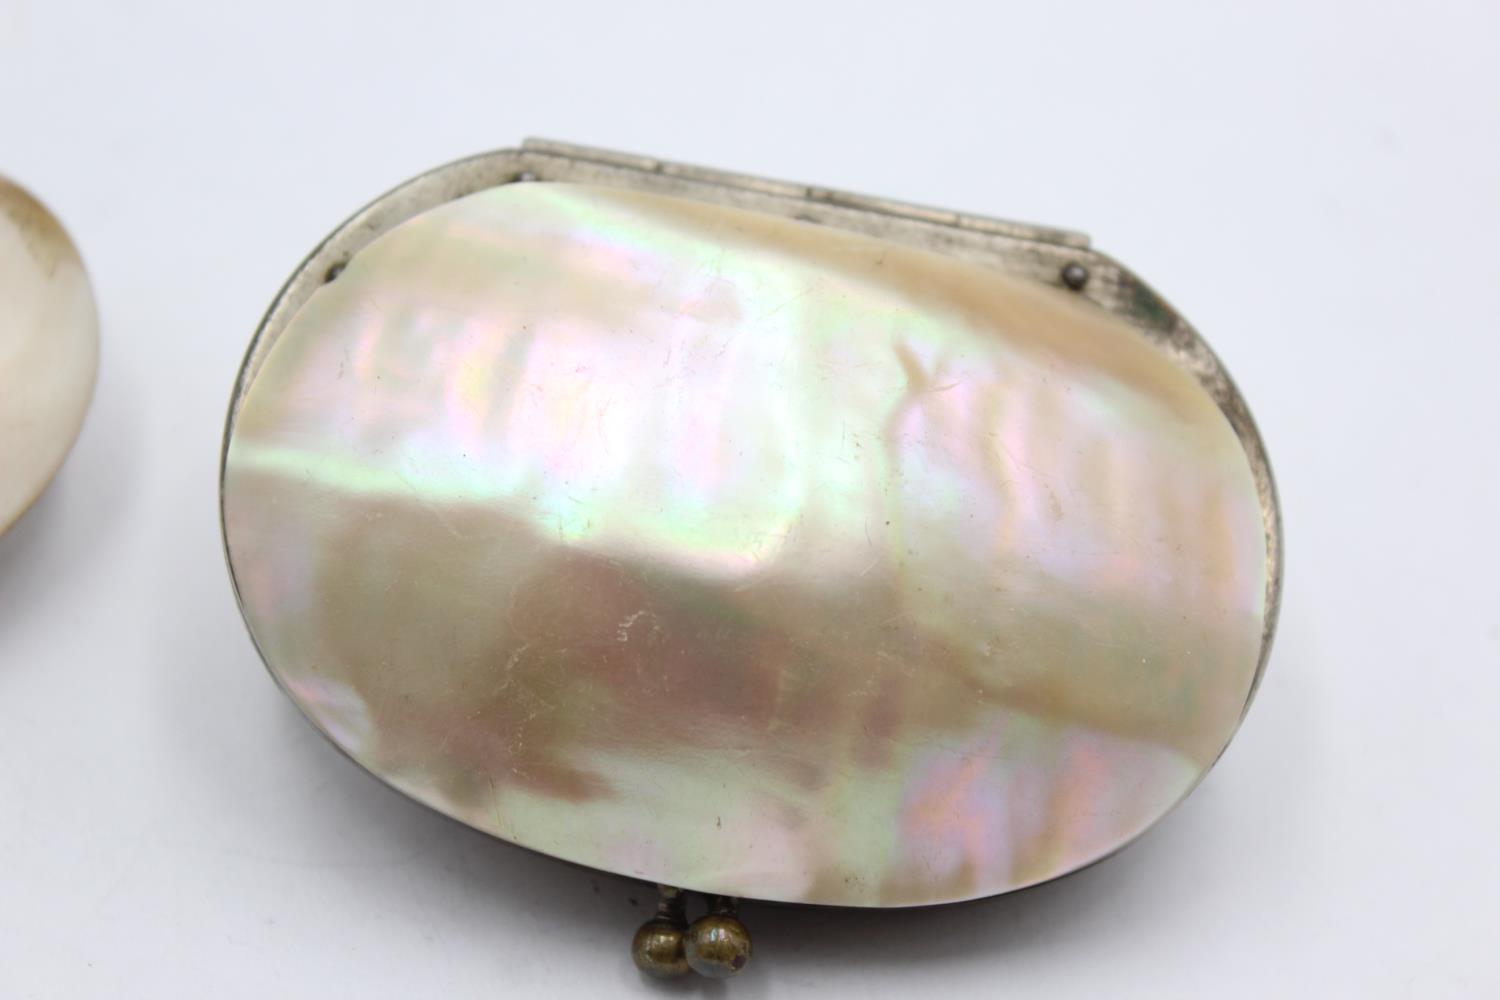 2 x Antique / Vintage Ladies MOTHER OF PEARL Shell Coin Purses / Cases In antique / vintage - Image 3 of 5